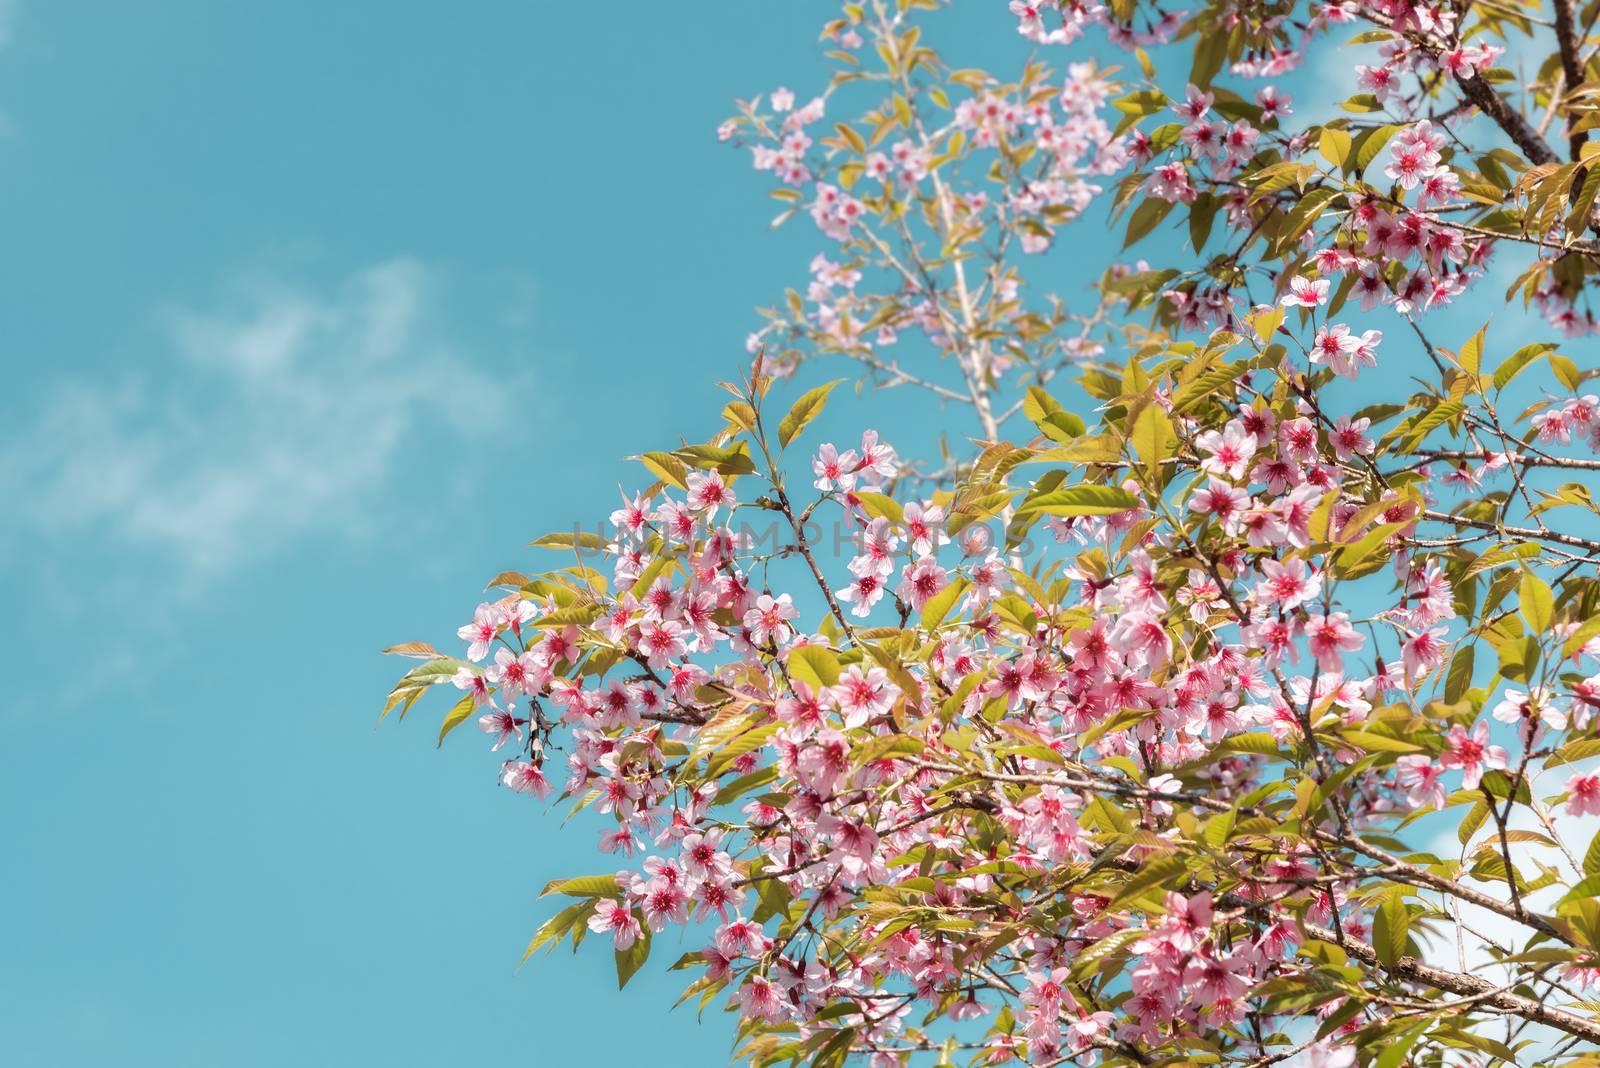 Pink Sakura Flowers is Blossoming in Spring Season, Beautiful Blooming Cherry Against Blue Sky Background. Natural Purity of Blossom Sakura on Tree Branch. Nature Plant and Flora by MahaHeang245789